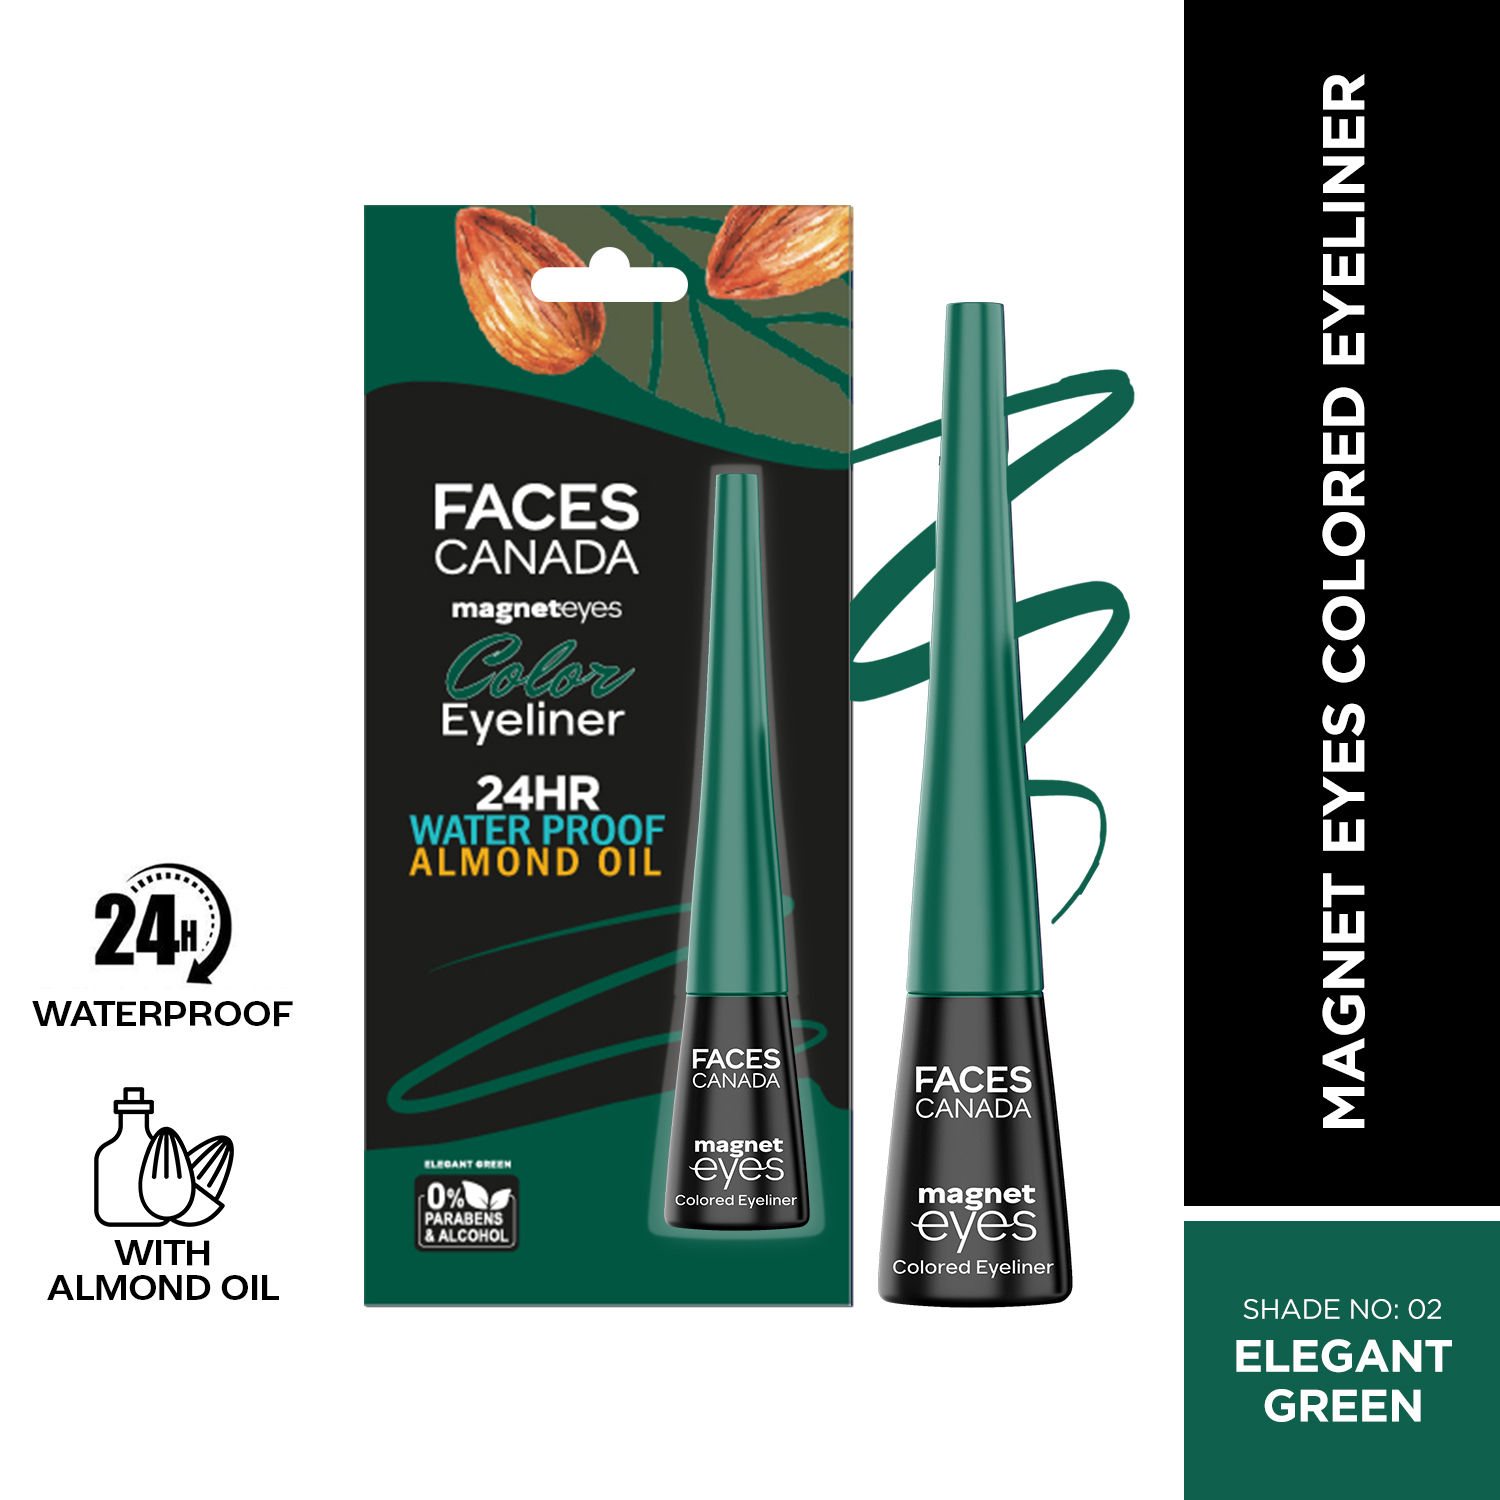 Buy FACES CANADA Magneteyes Color Eyeliner - Elegant Green, 4 ml | Glossy Finish | 24HR Long-lasting | Waterproof | Smudgeproof | Precise Application | Intense Color Payoff | Almond Extract & Vitamin E - Purplle